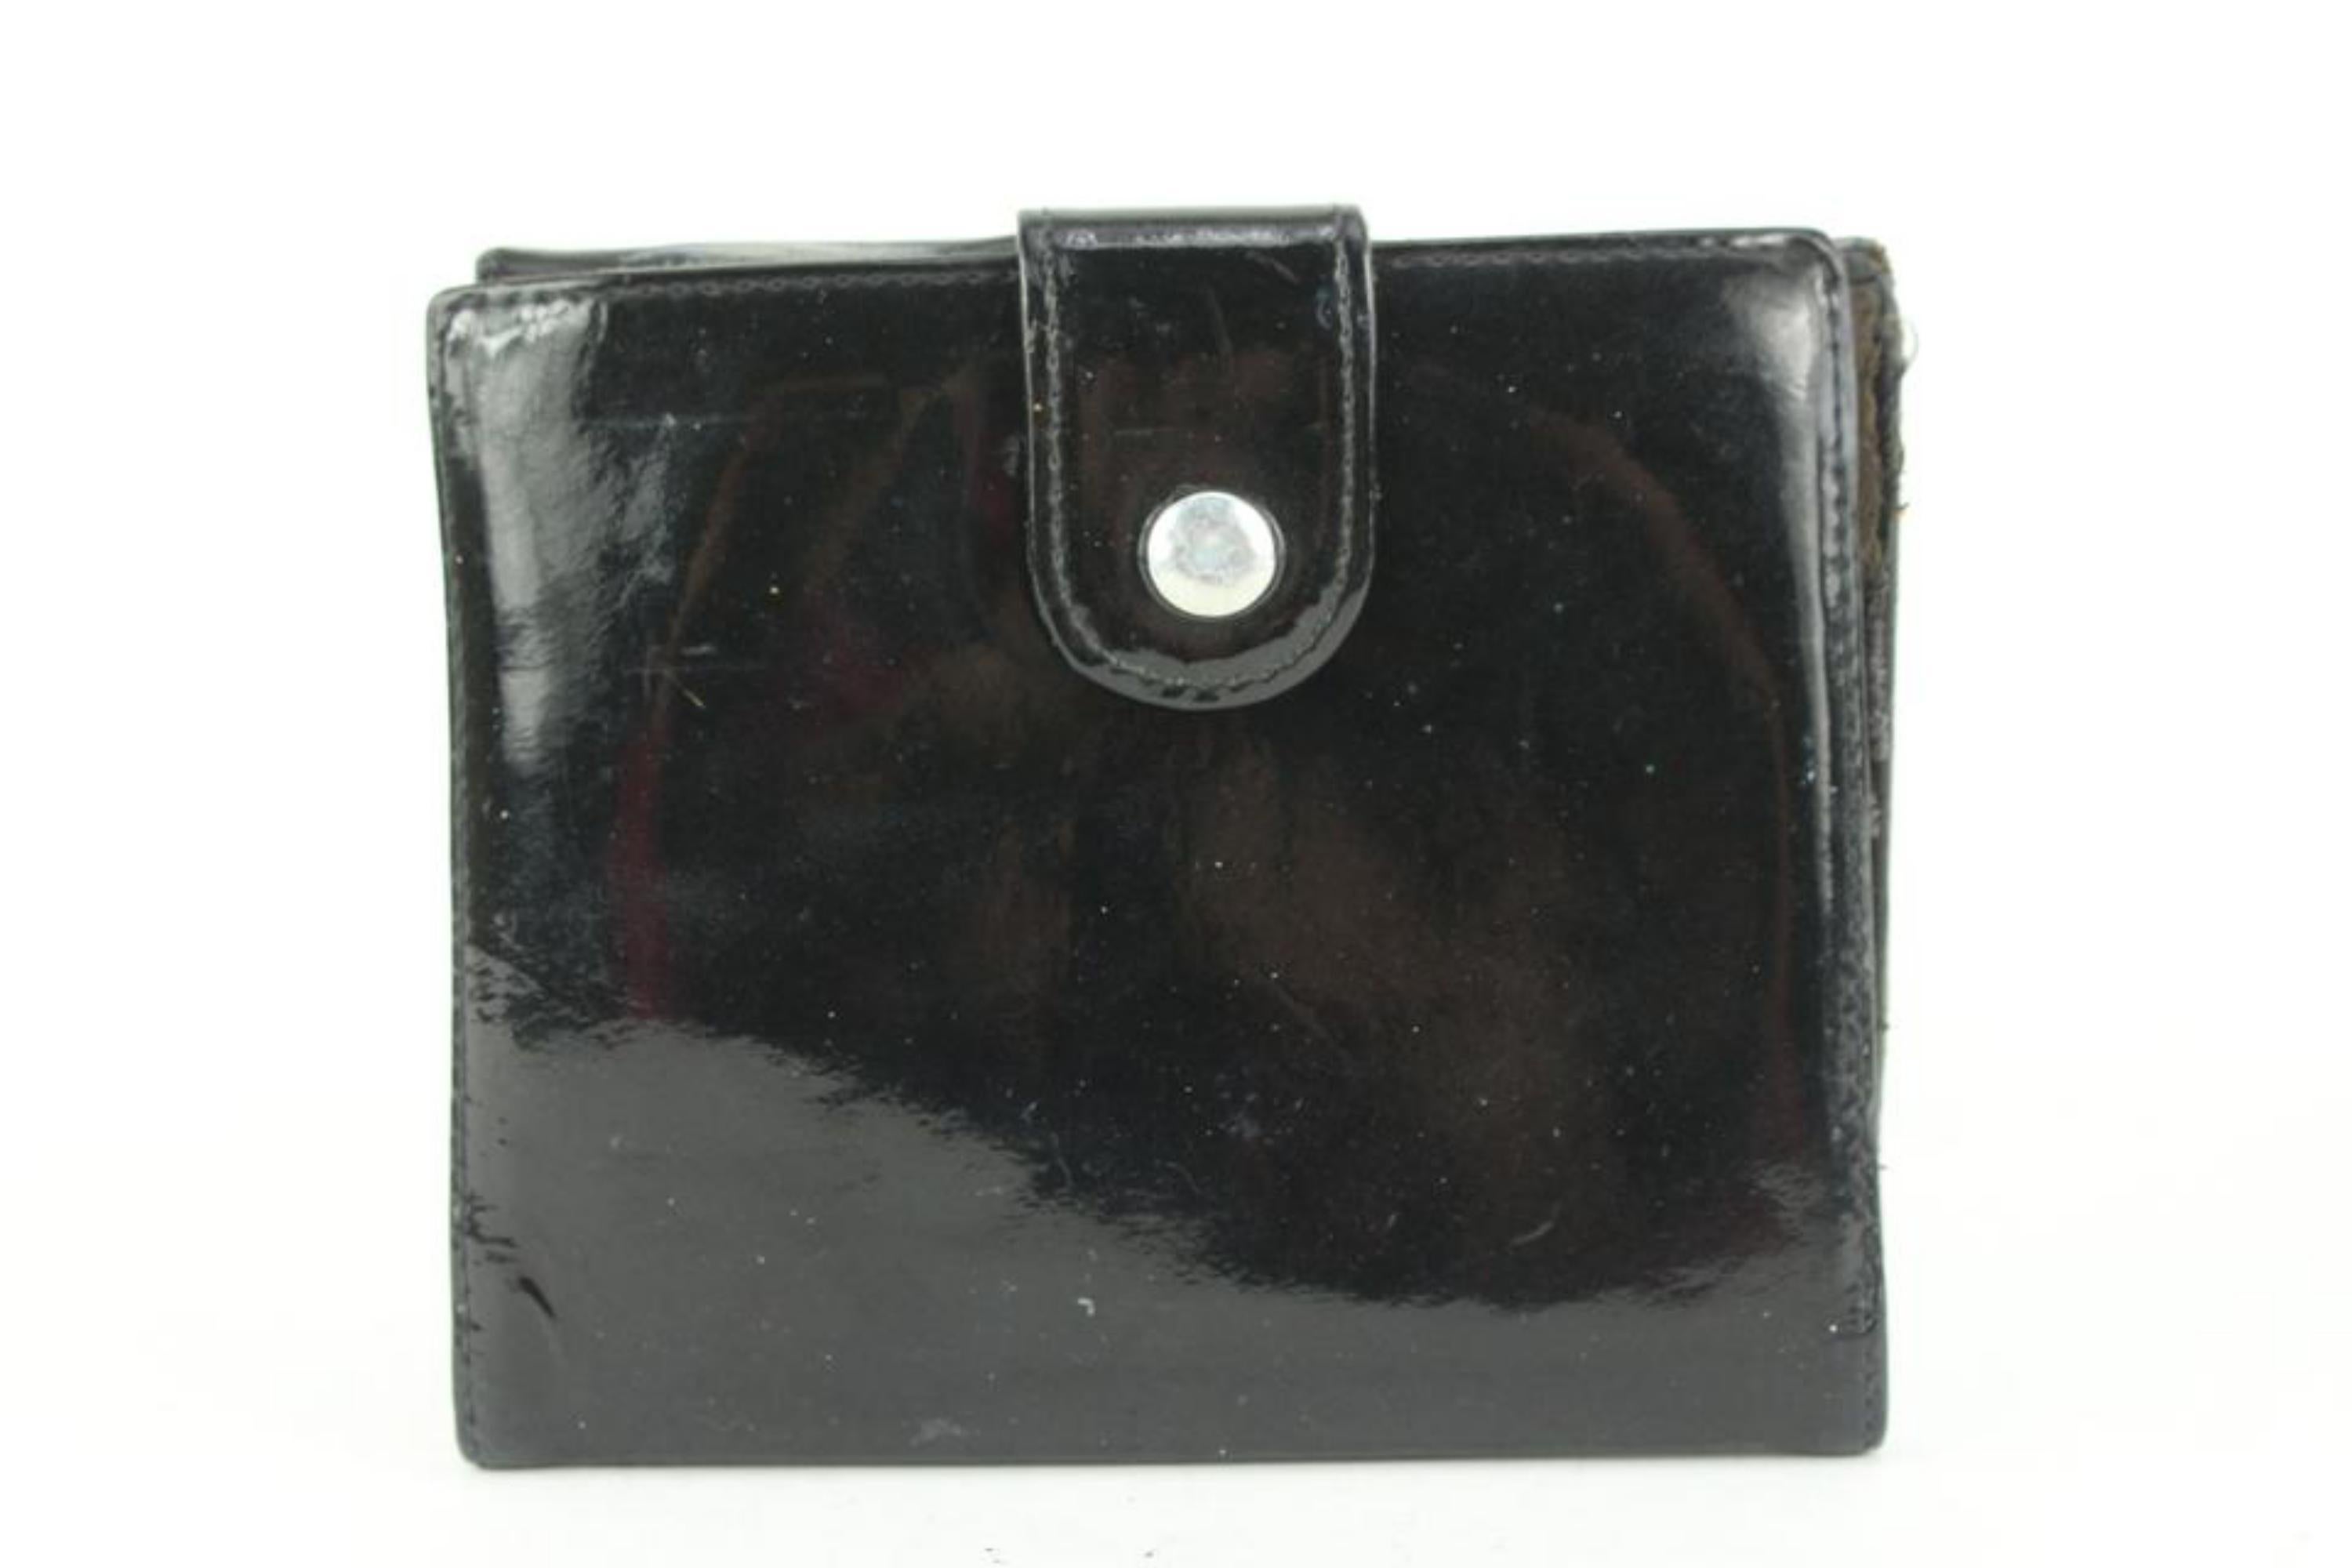 Chanel Black Patent Leather CC Logo Square Compact Coin Purse Wallet 6C111 3